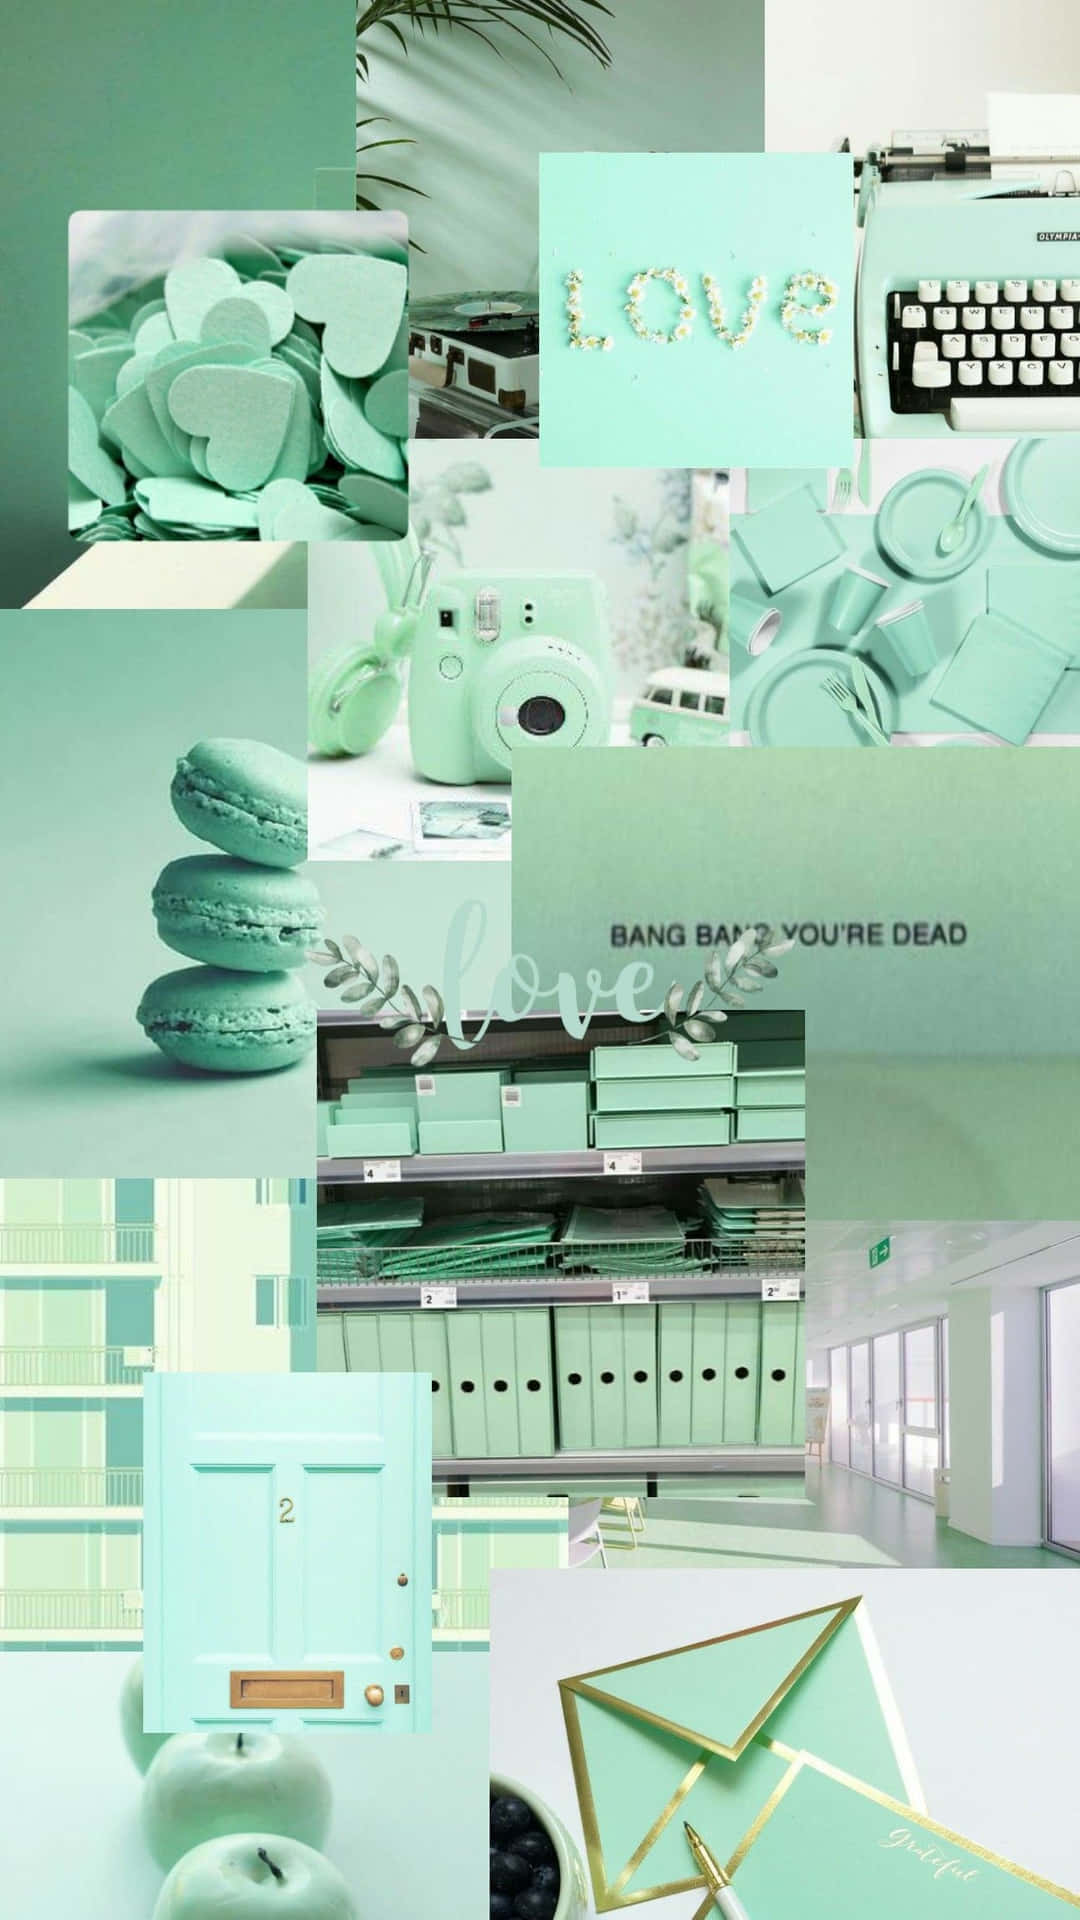 Mint Aesthetic Collage Wallpaper